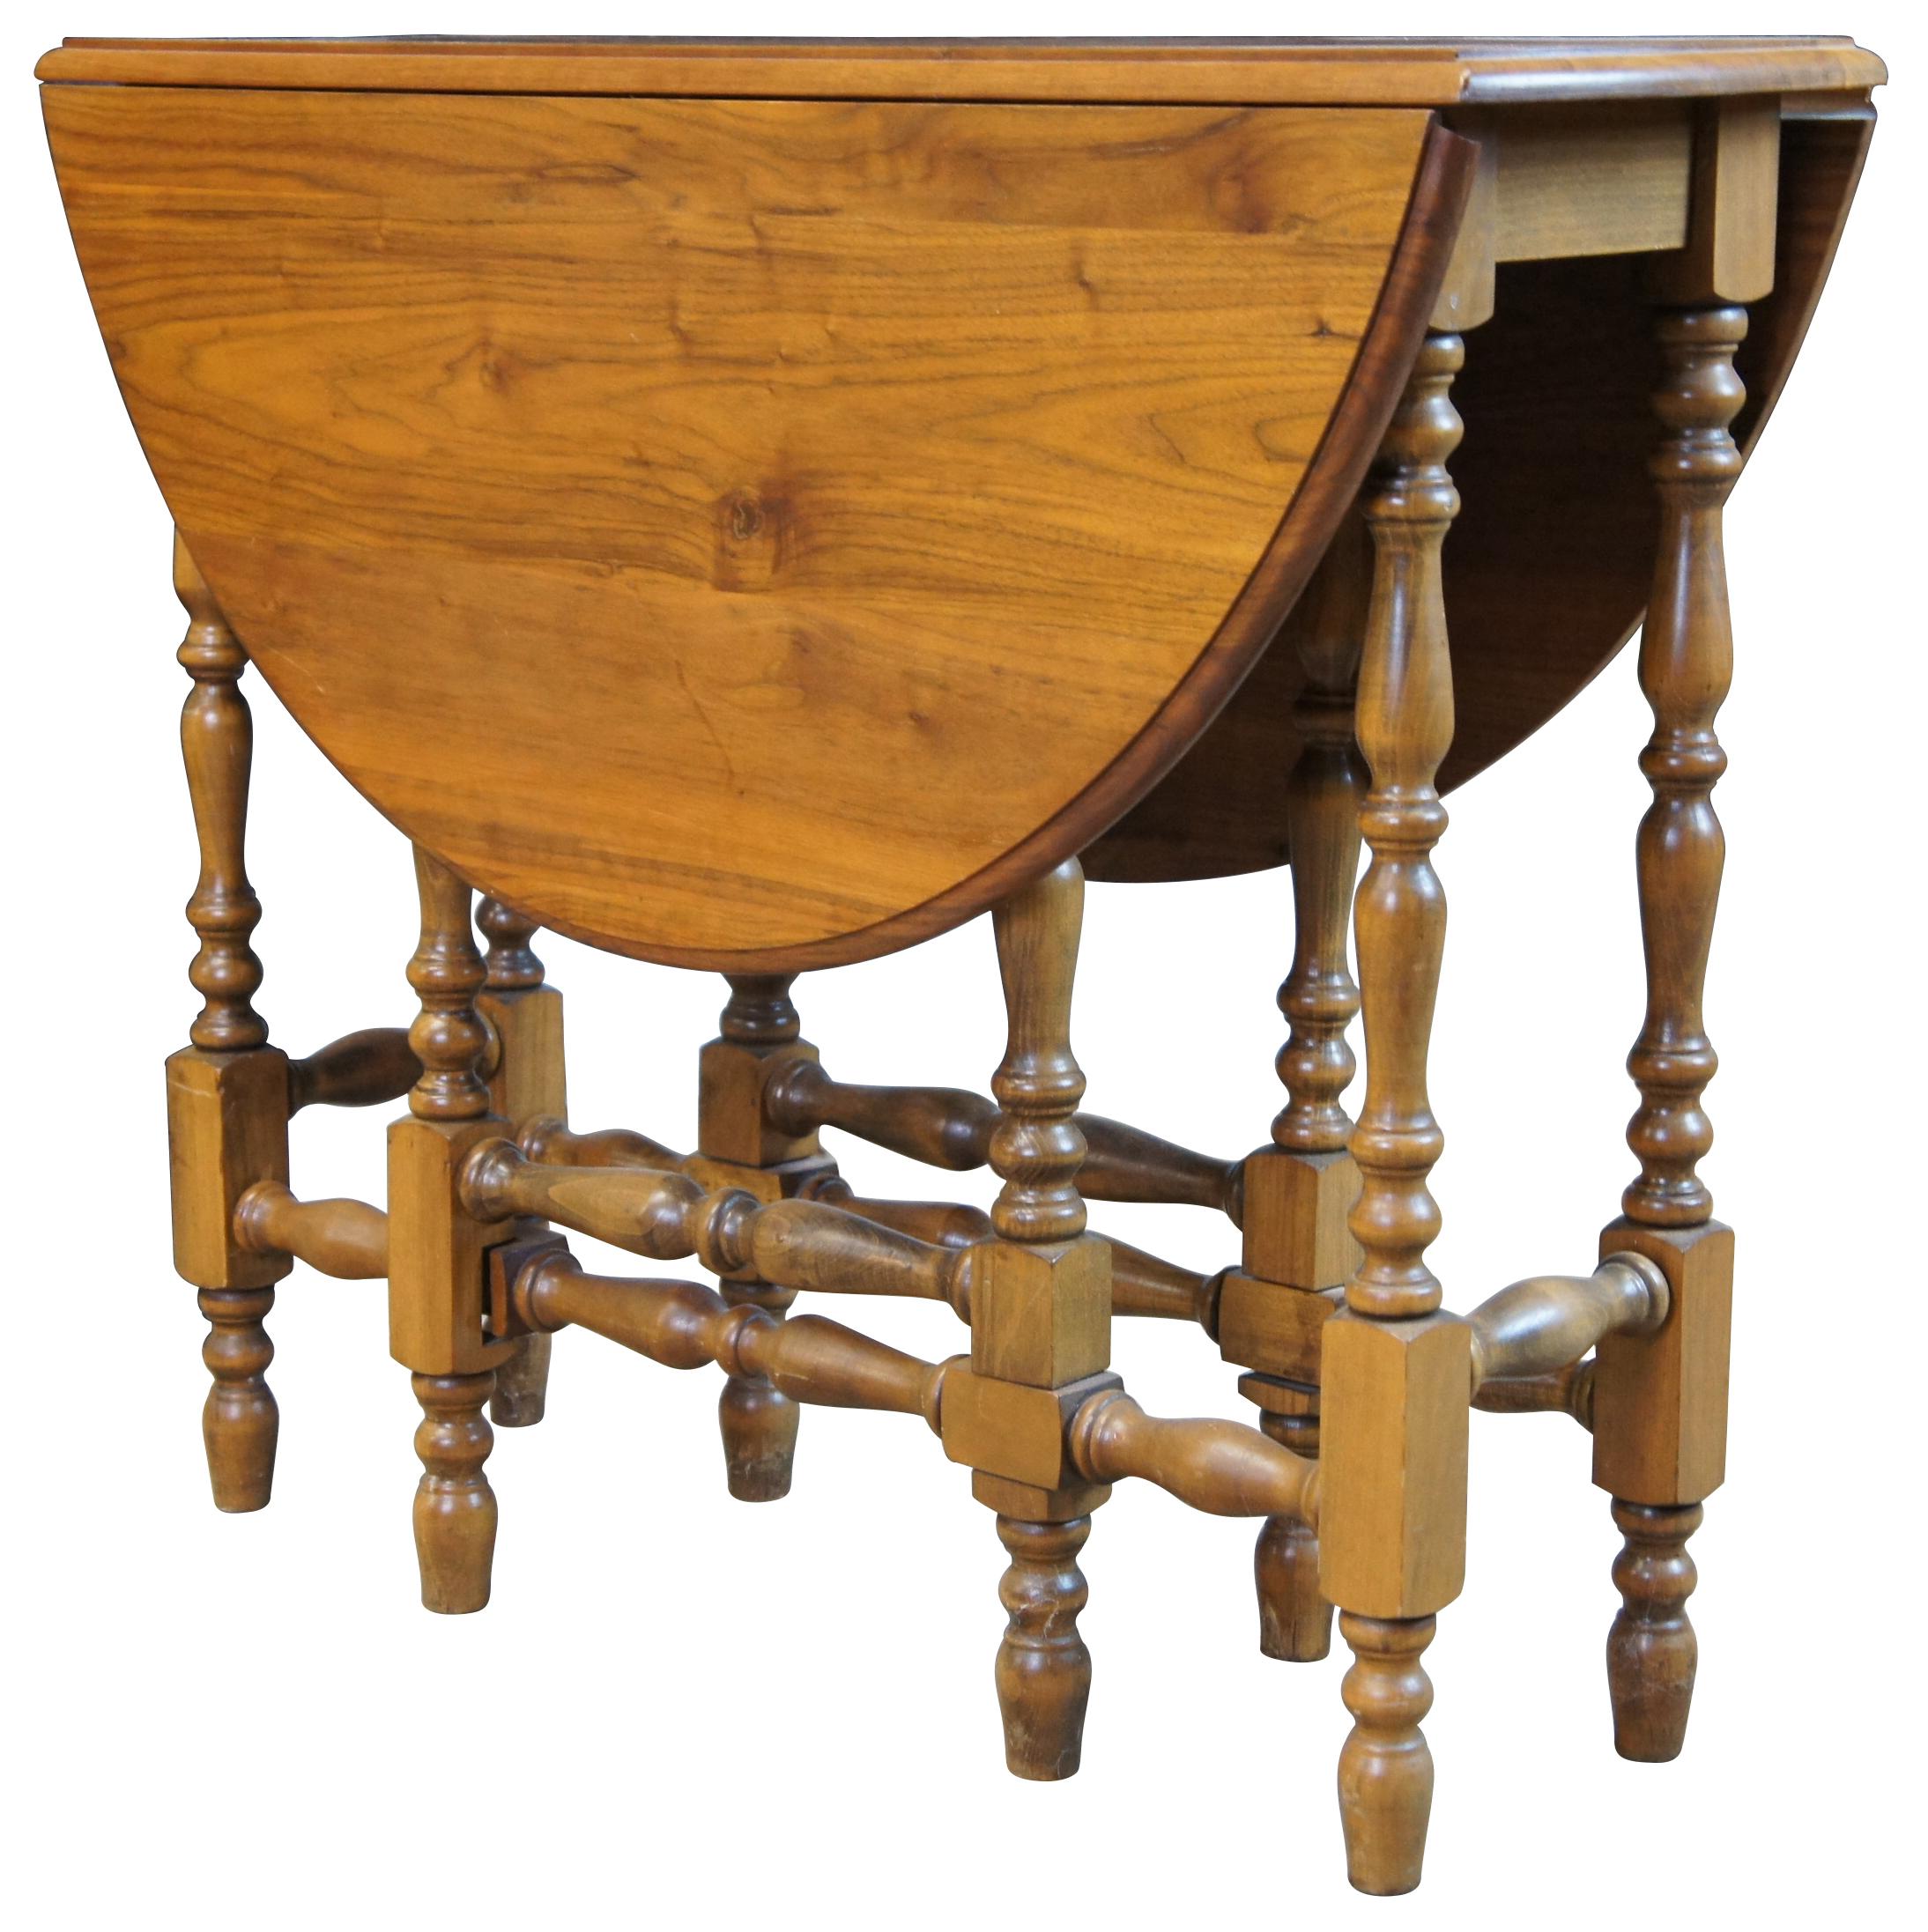 Antique English William & Mary style walnut drop leaf gateleg table featuring oval form with turned legs.

Leaves extend 15